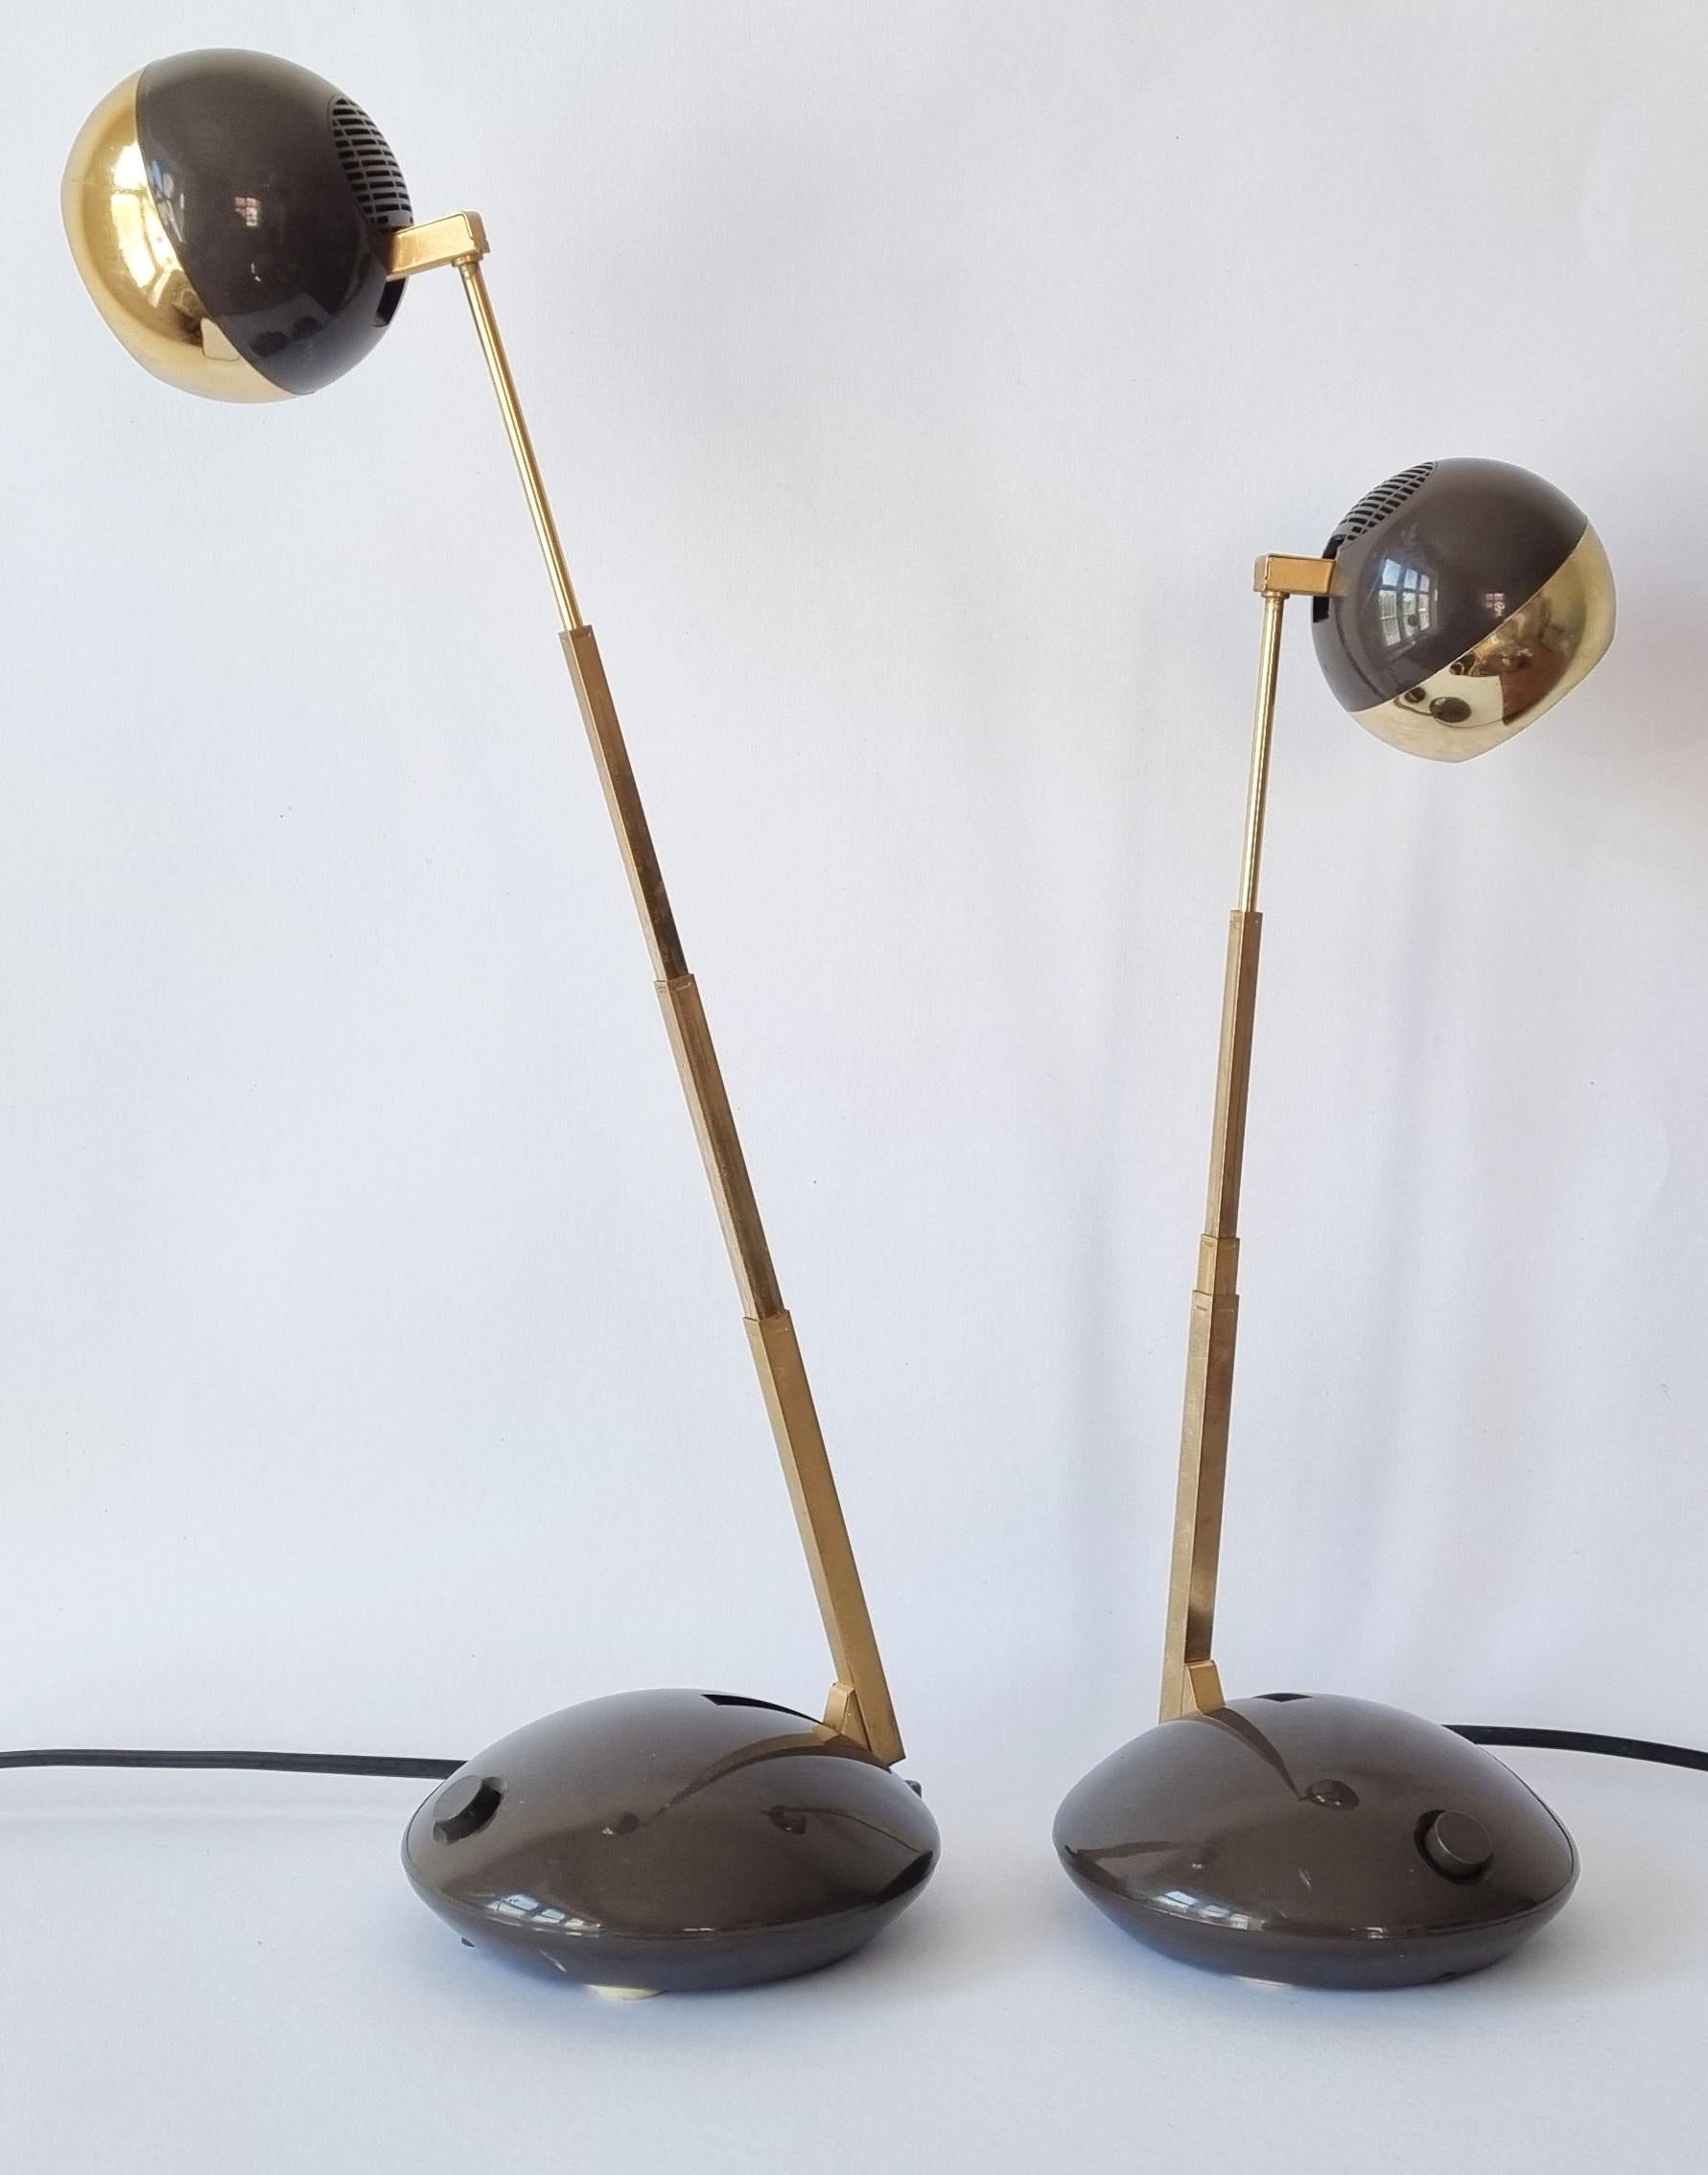 Pair of Midcentury Telescope Table Lamps Eichhoff Werke, Germany, 1970s For Sale 1